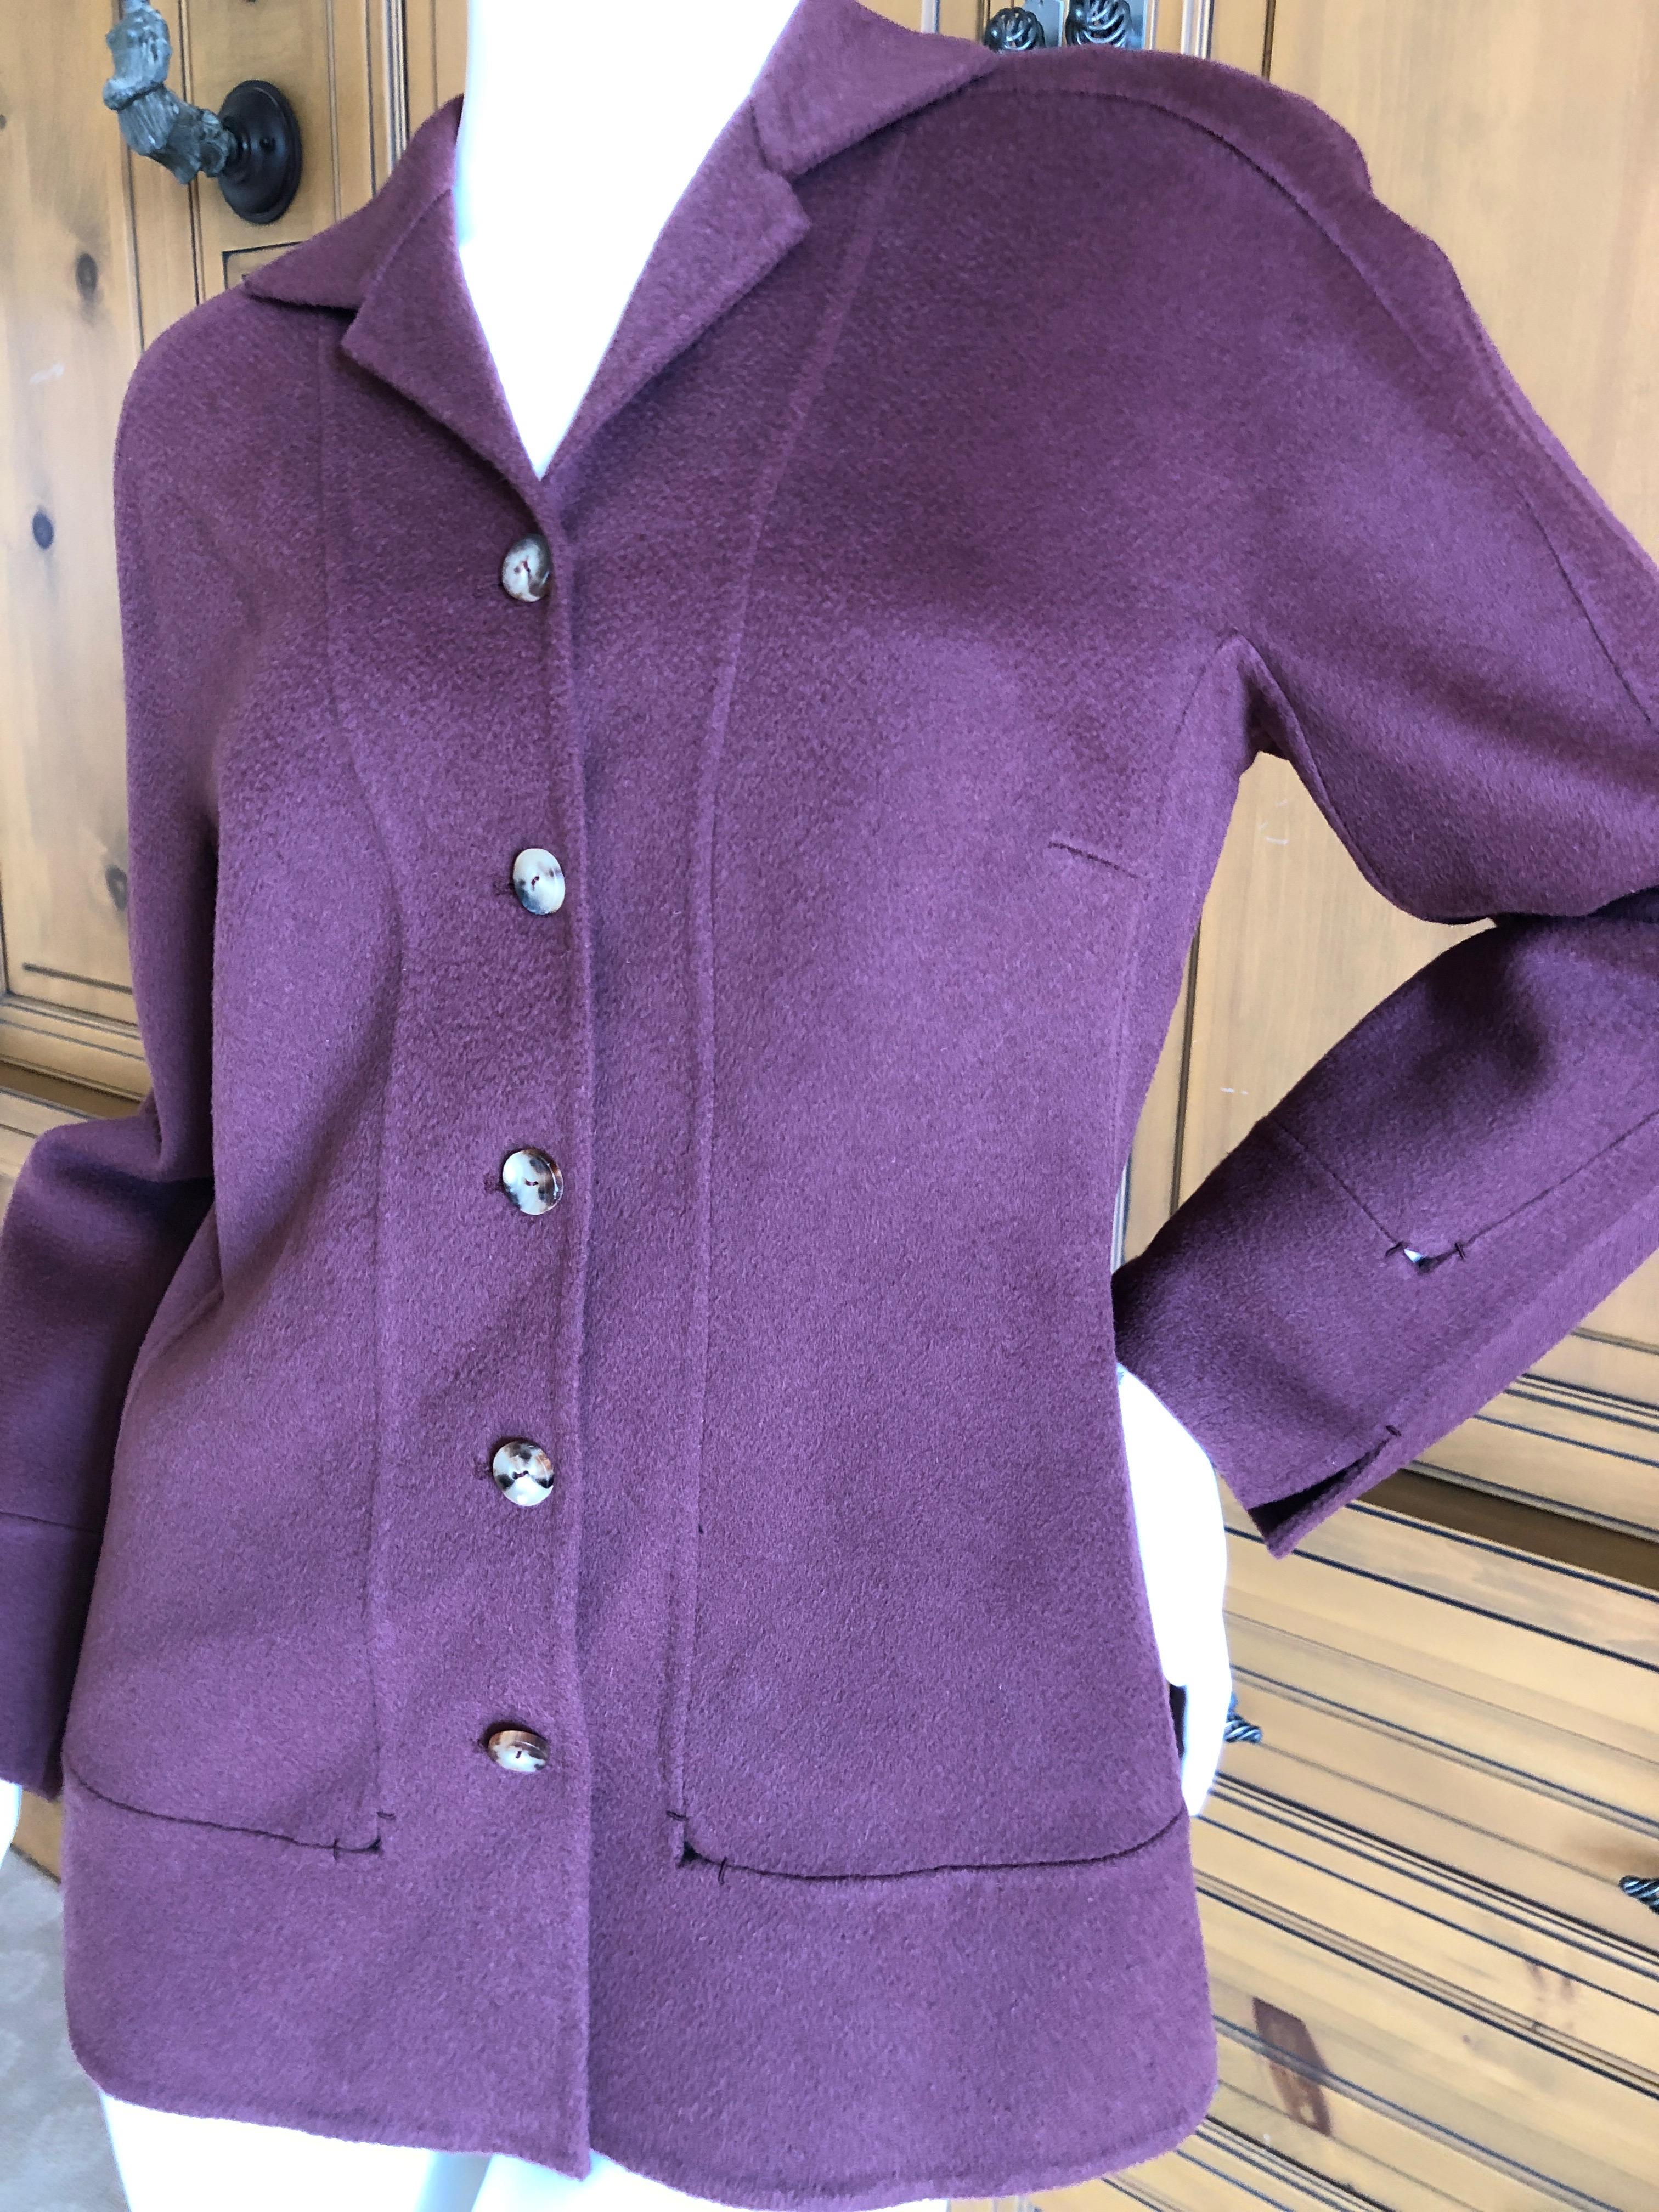 Chado Ralph Rucci Luxurious Doubleface Cashmere Jacket w Open Stitch Details   In Excellent Condition For Sale In Cloverdale, CA